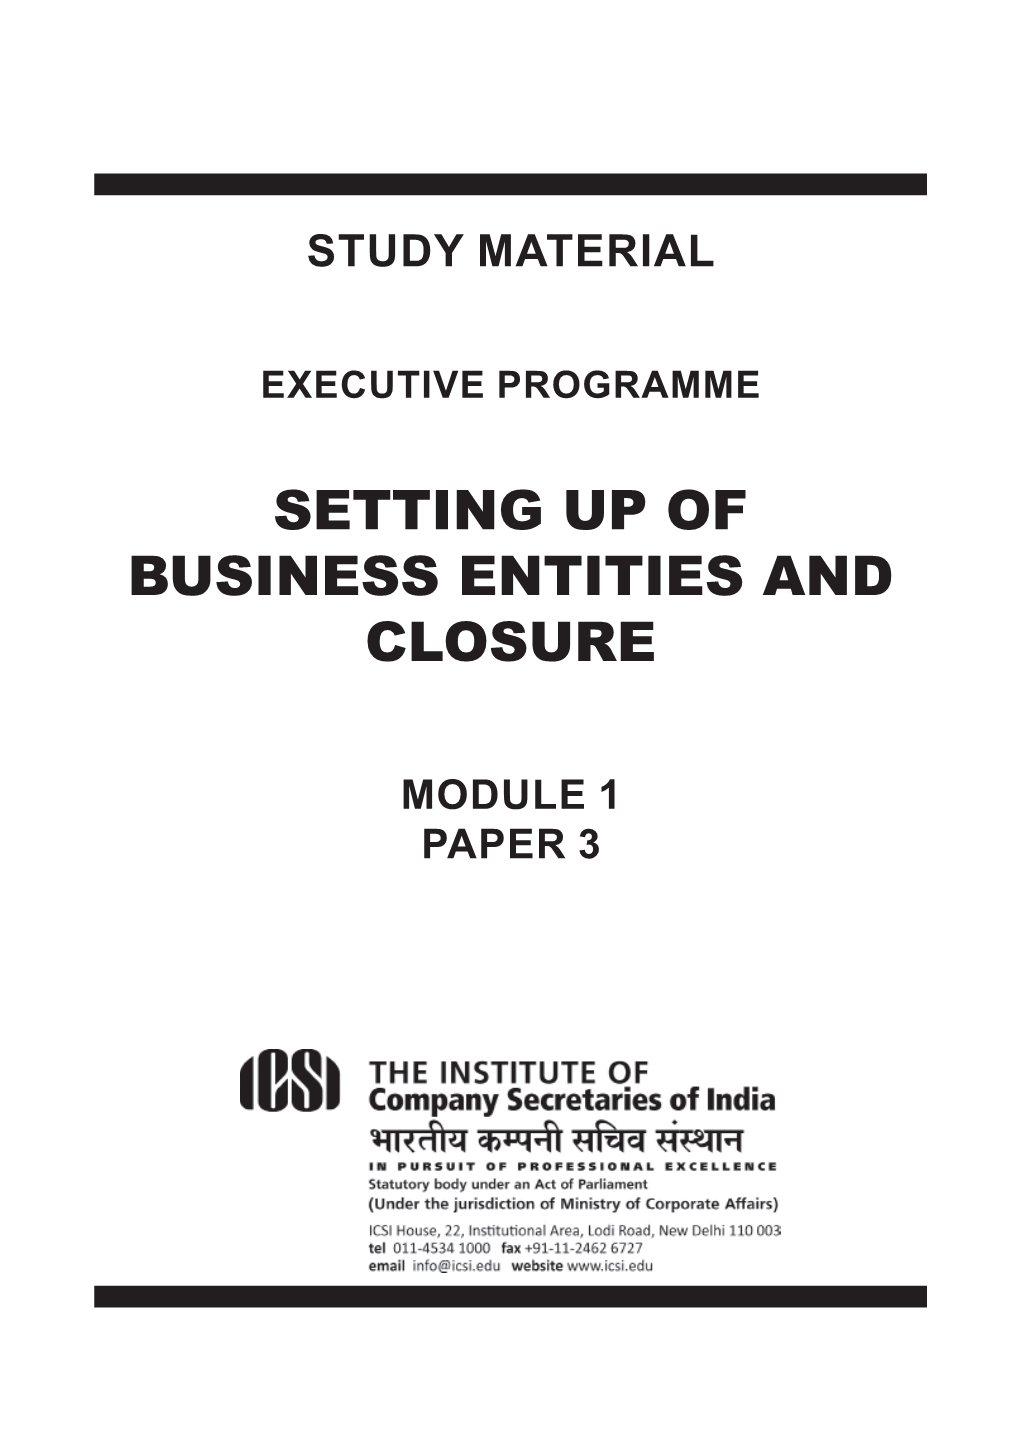 Paper-3: Setting up of Business Entities and Closure